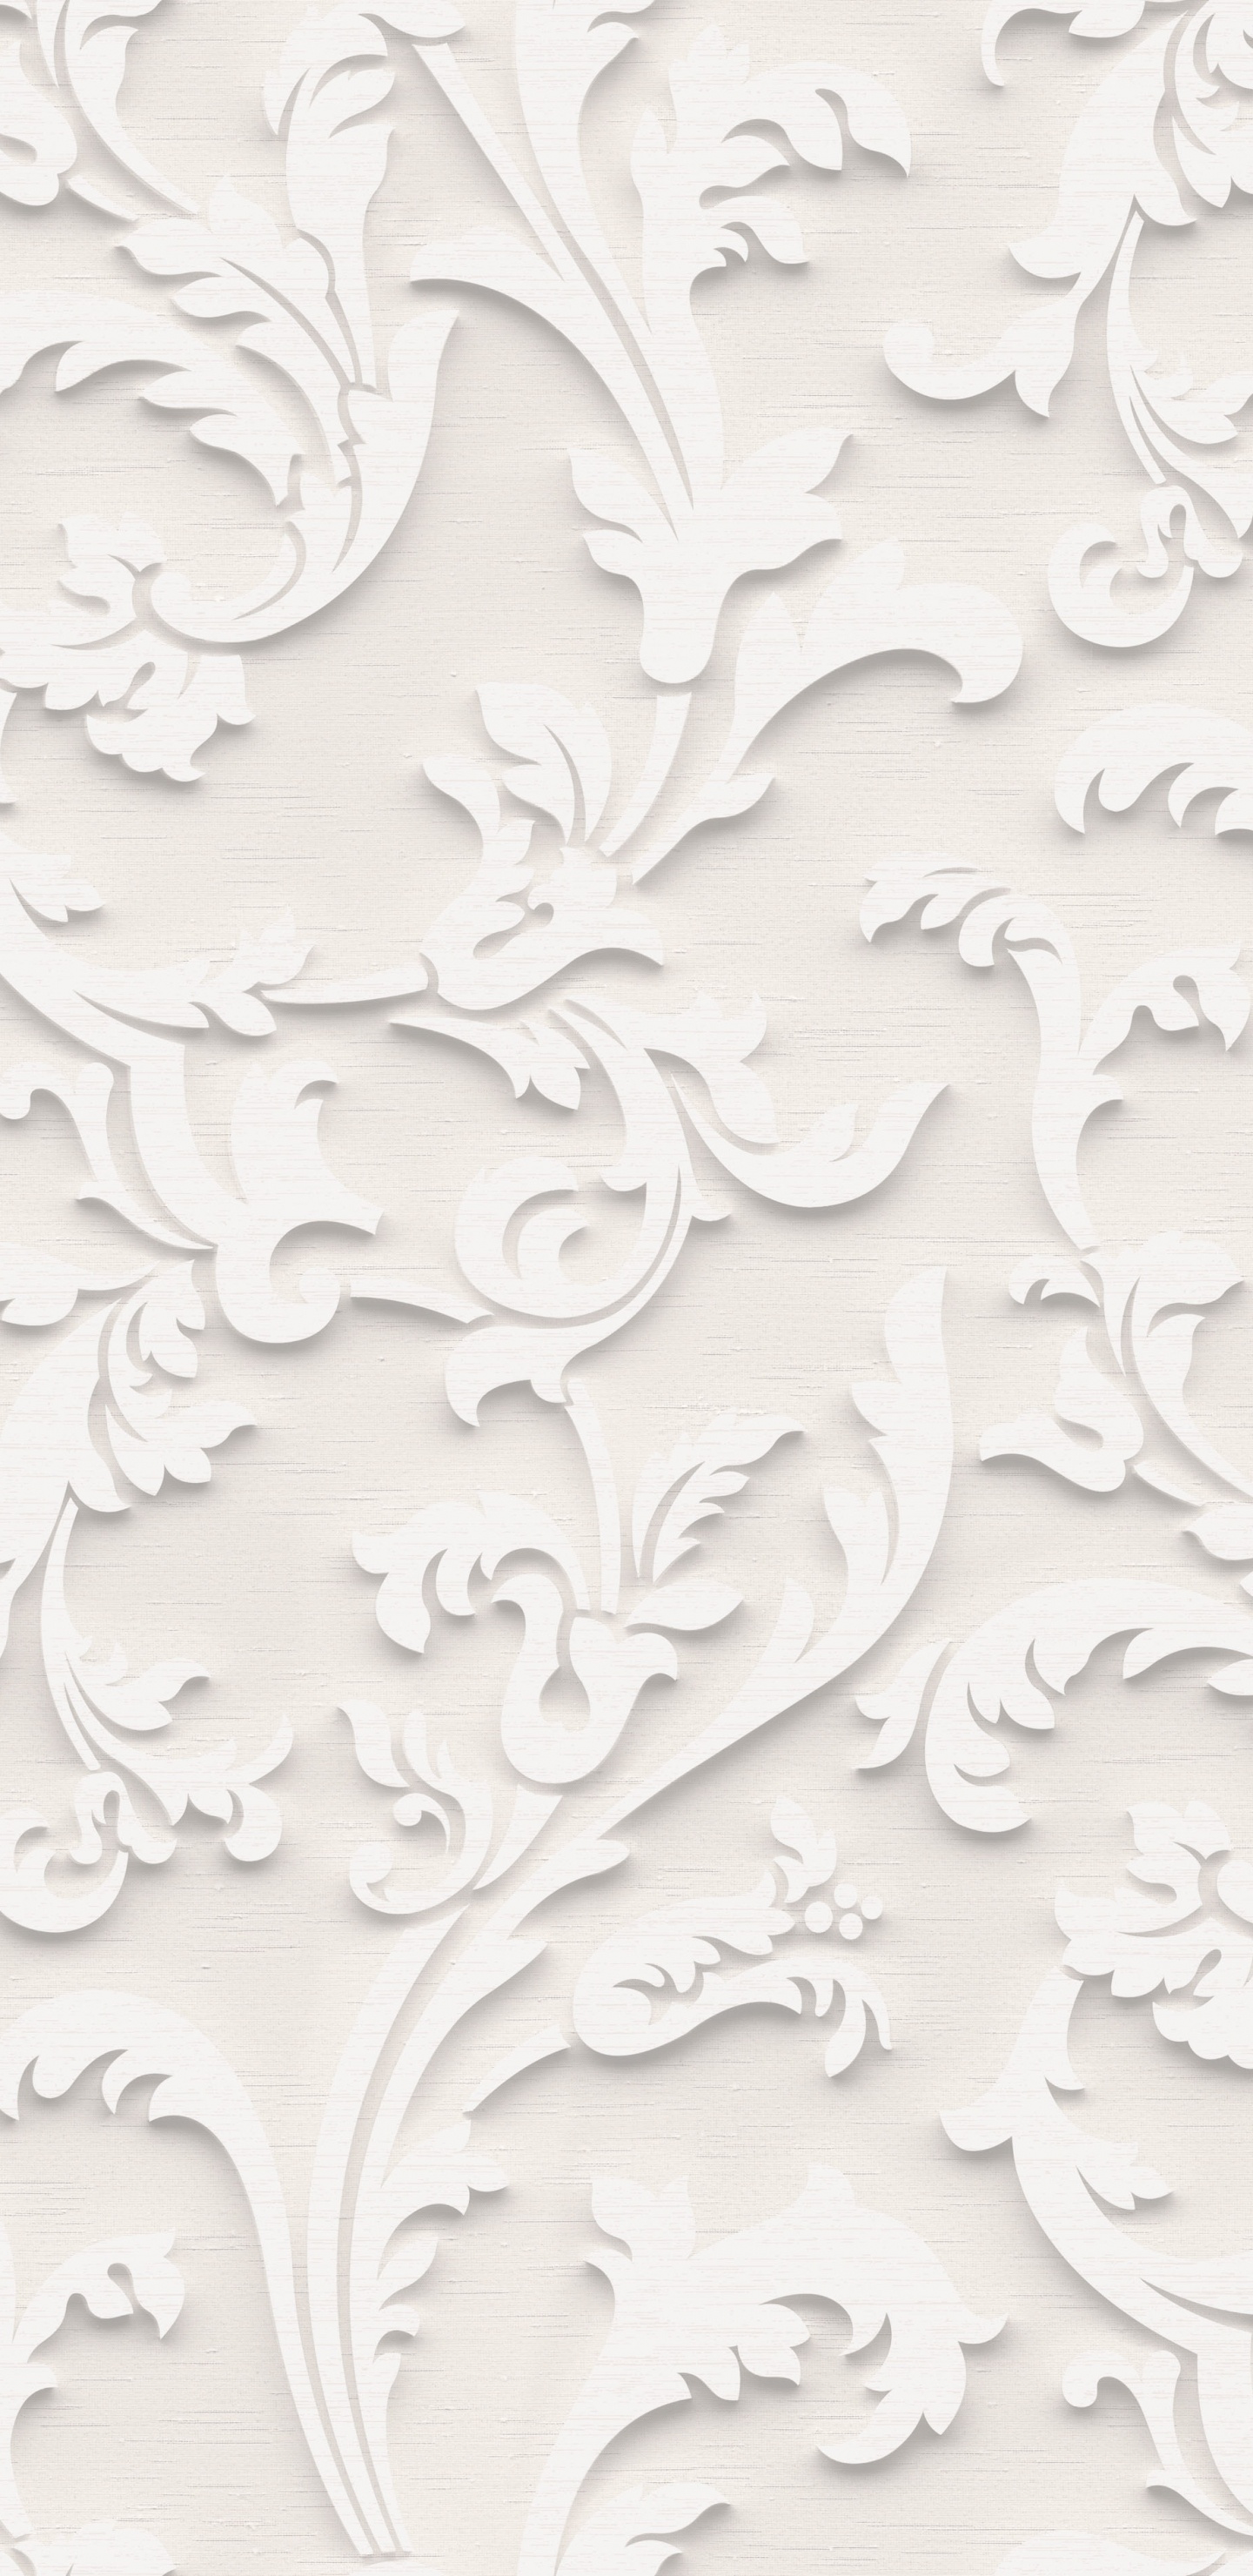 White and Gray Floral Textile. Wallpaper in 1440x2960 Resolution